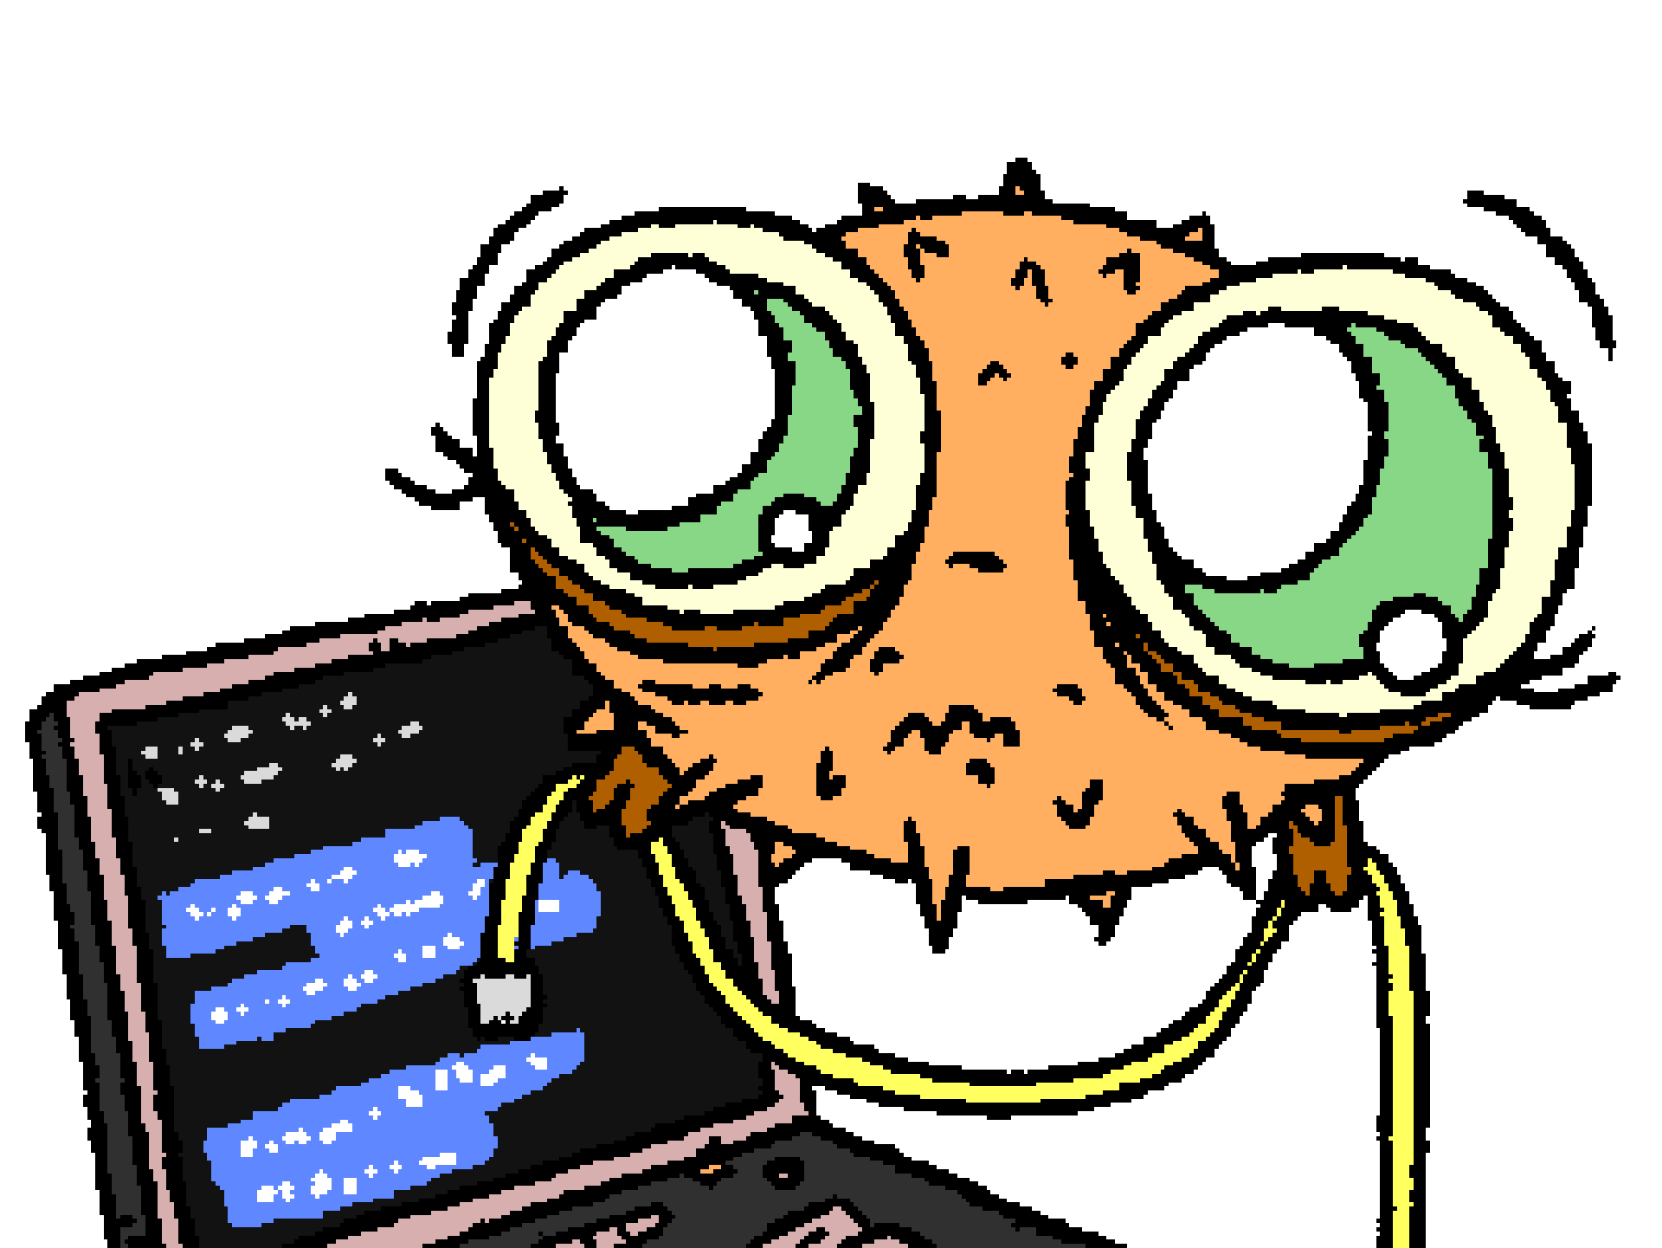 A small Puffy with big cute eyes holding a network cable. The background features a laptop, on its screen there issome highlighted text in blue in a terminal.